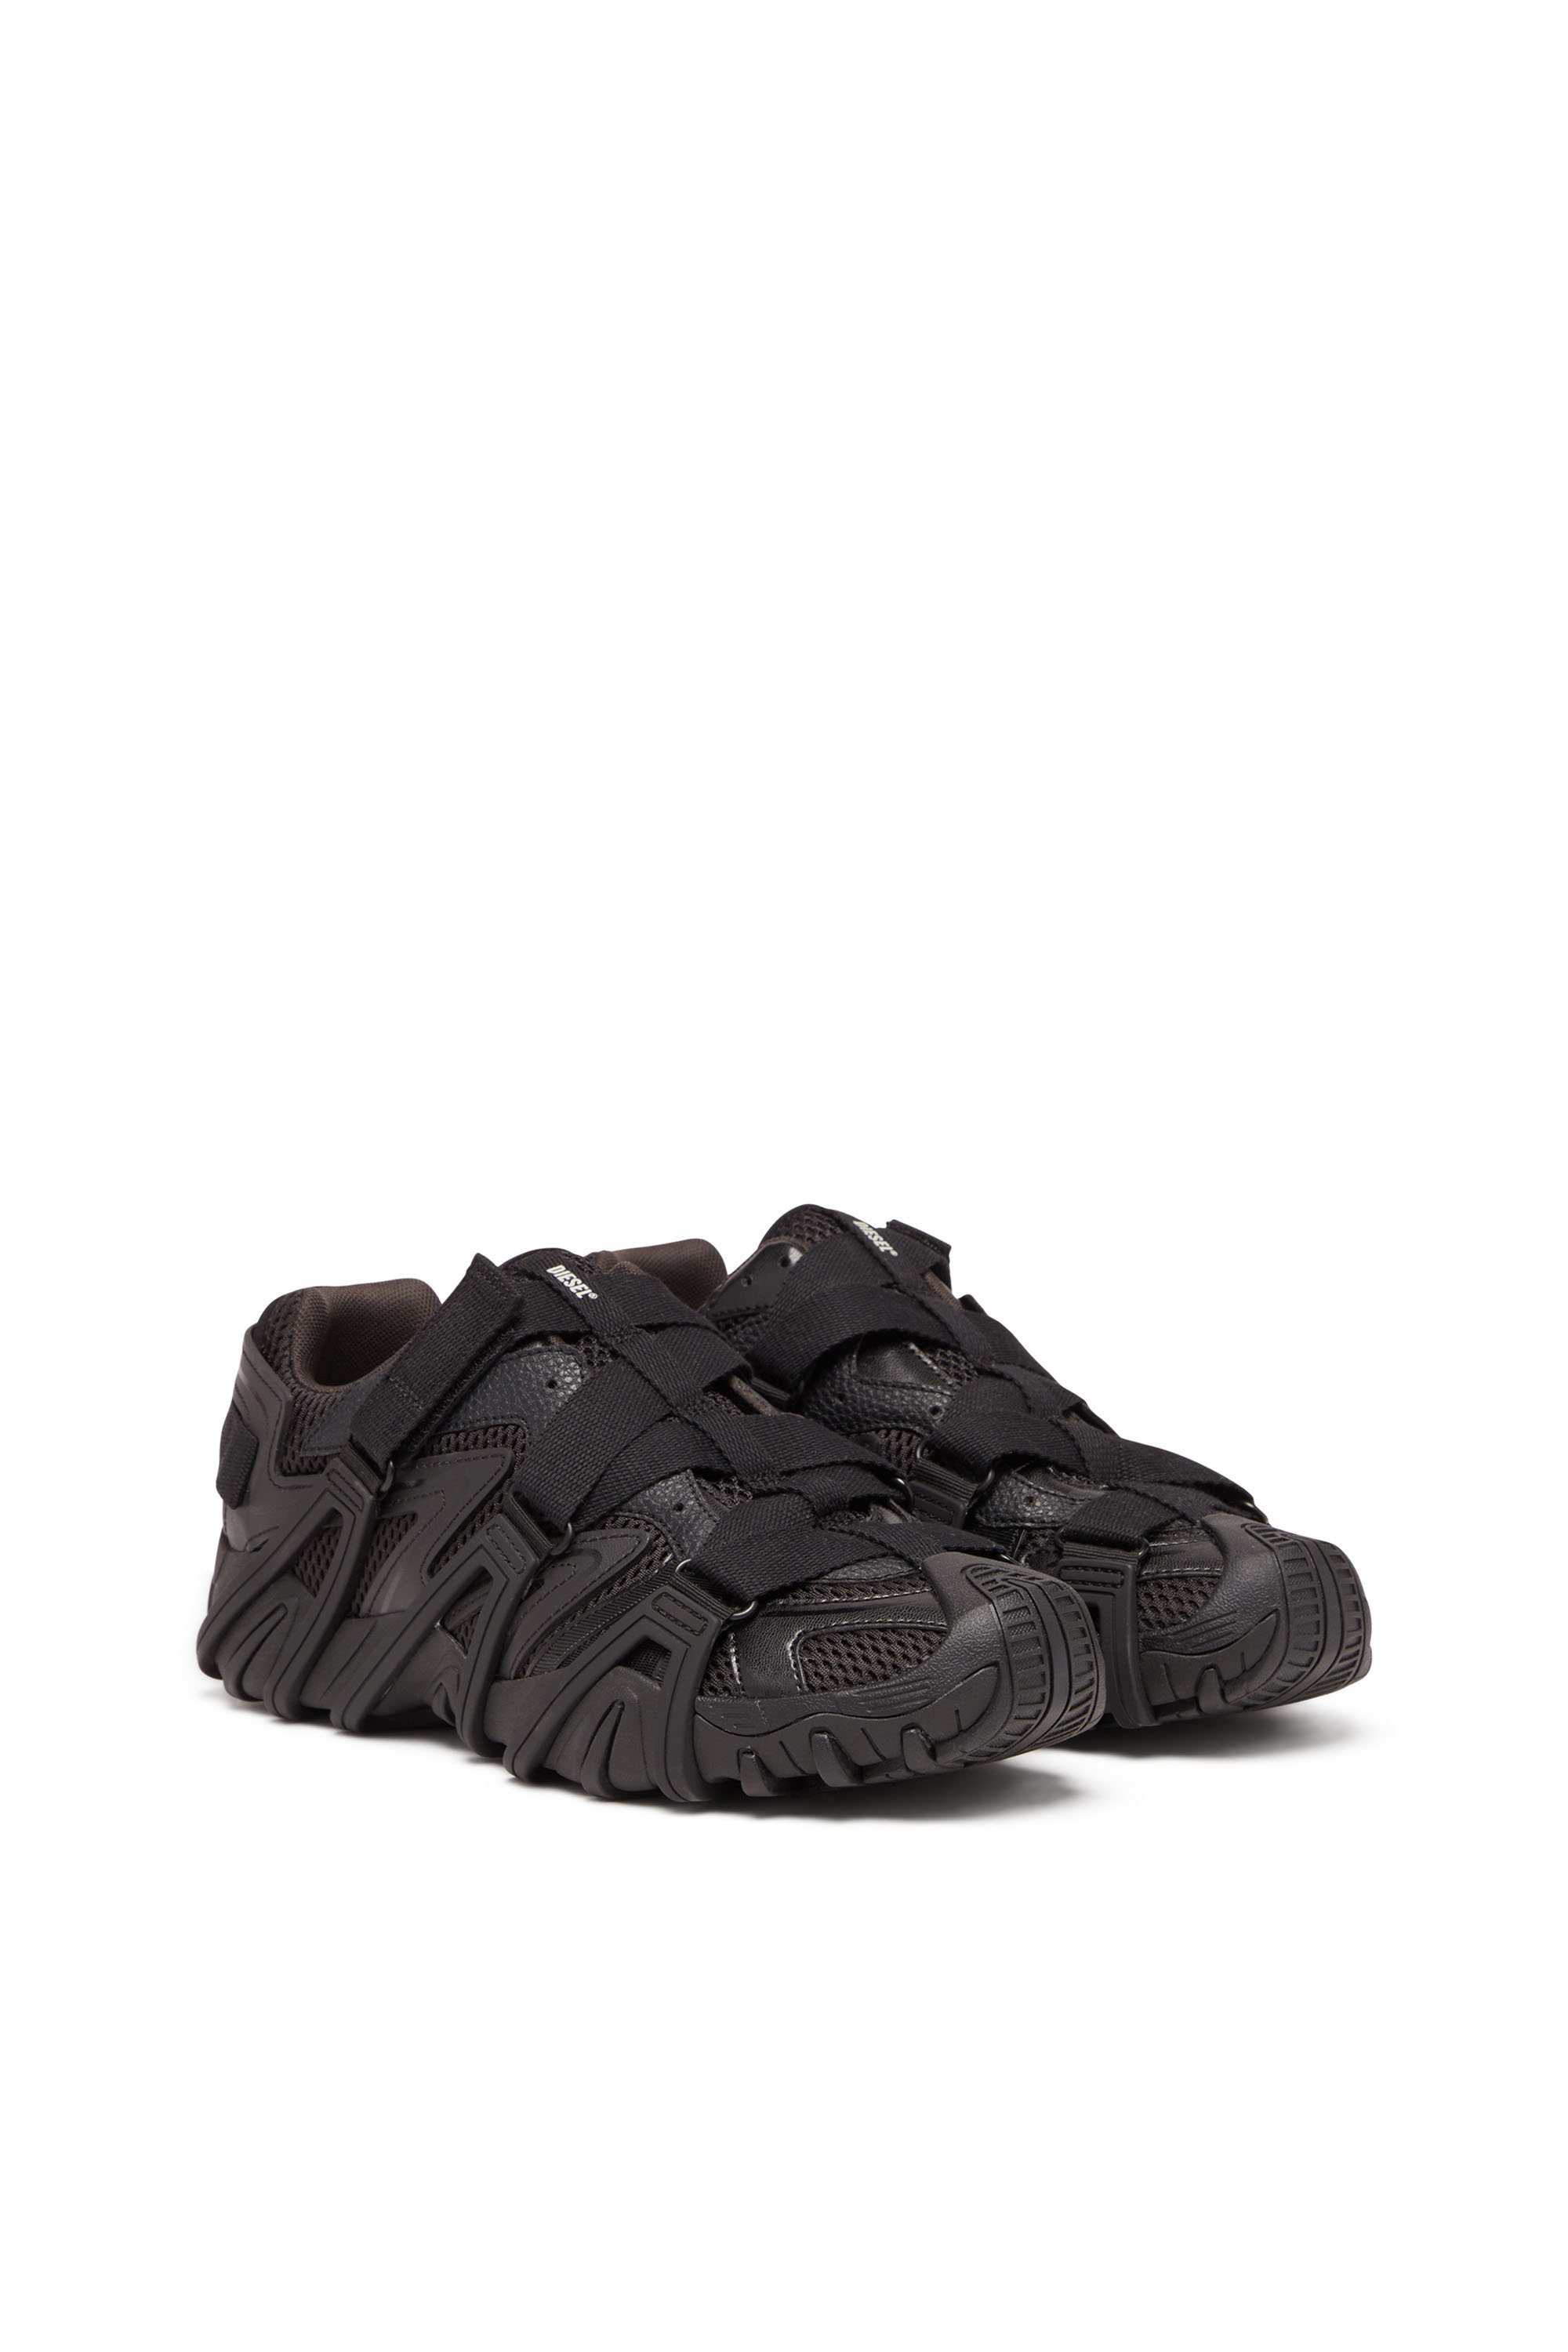 Diesel - S-PROTOTYPE-CR, Man S-Prototype-CR - Caged sneakers in mesh and leather in Black - Image 2